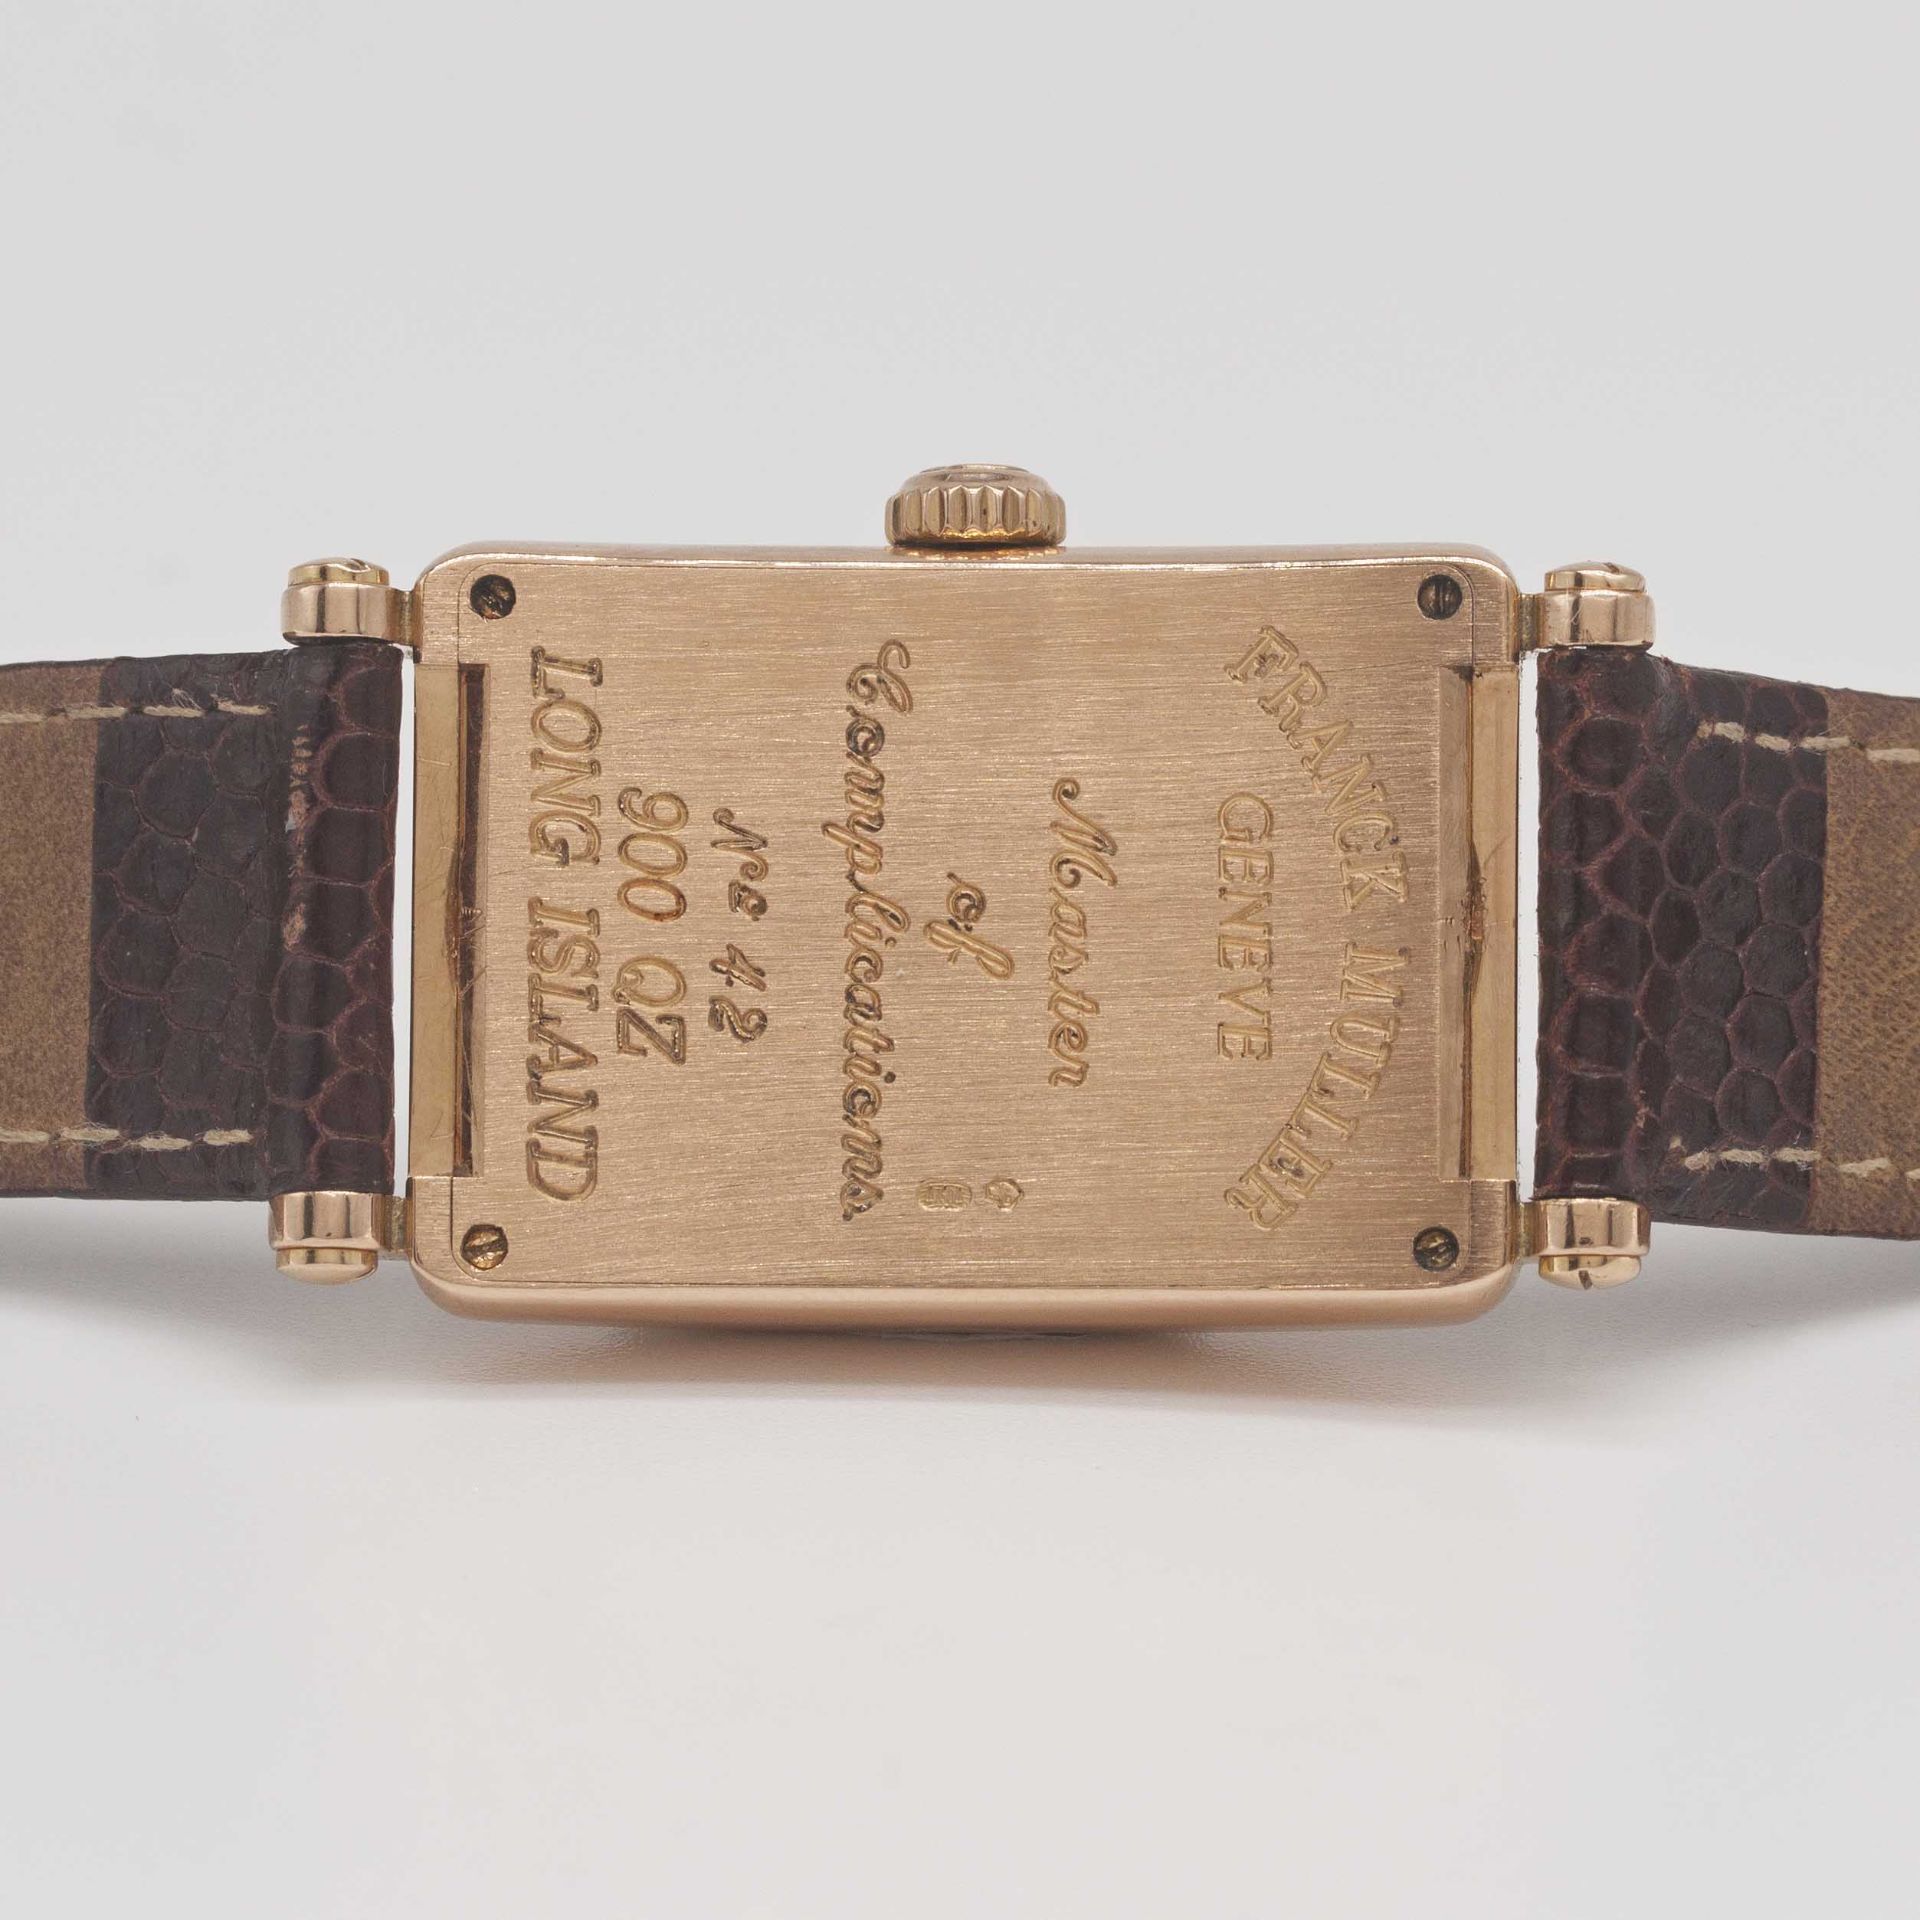 A LADIES 18K SOLID ROSE GOLD FRANCK MULLER LONG ISLAND WRIST WATCH CIRCA 2005, REF. 900 QZ WITH PINK - Image 5 of 7